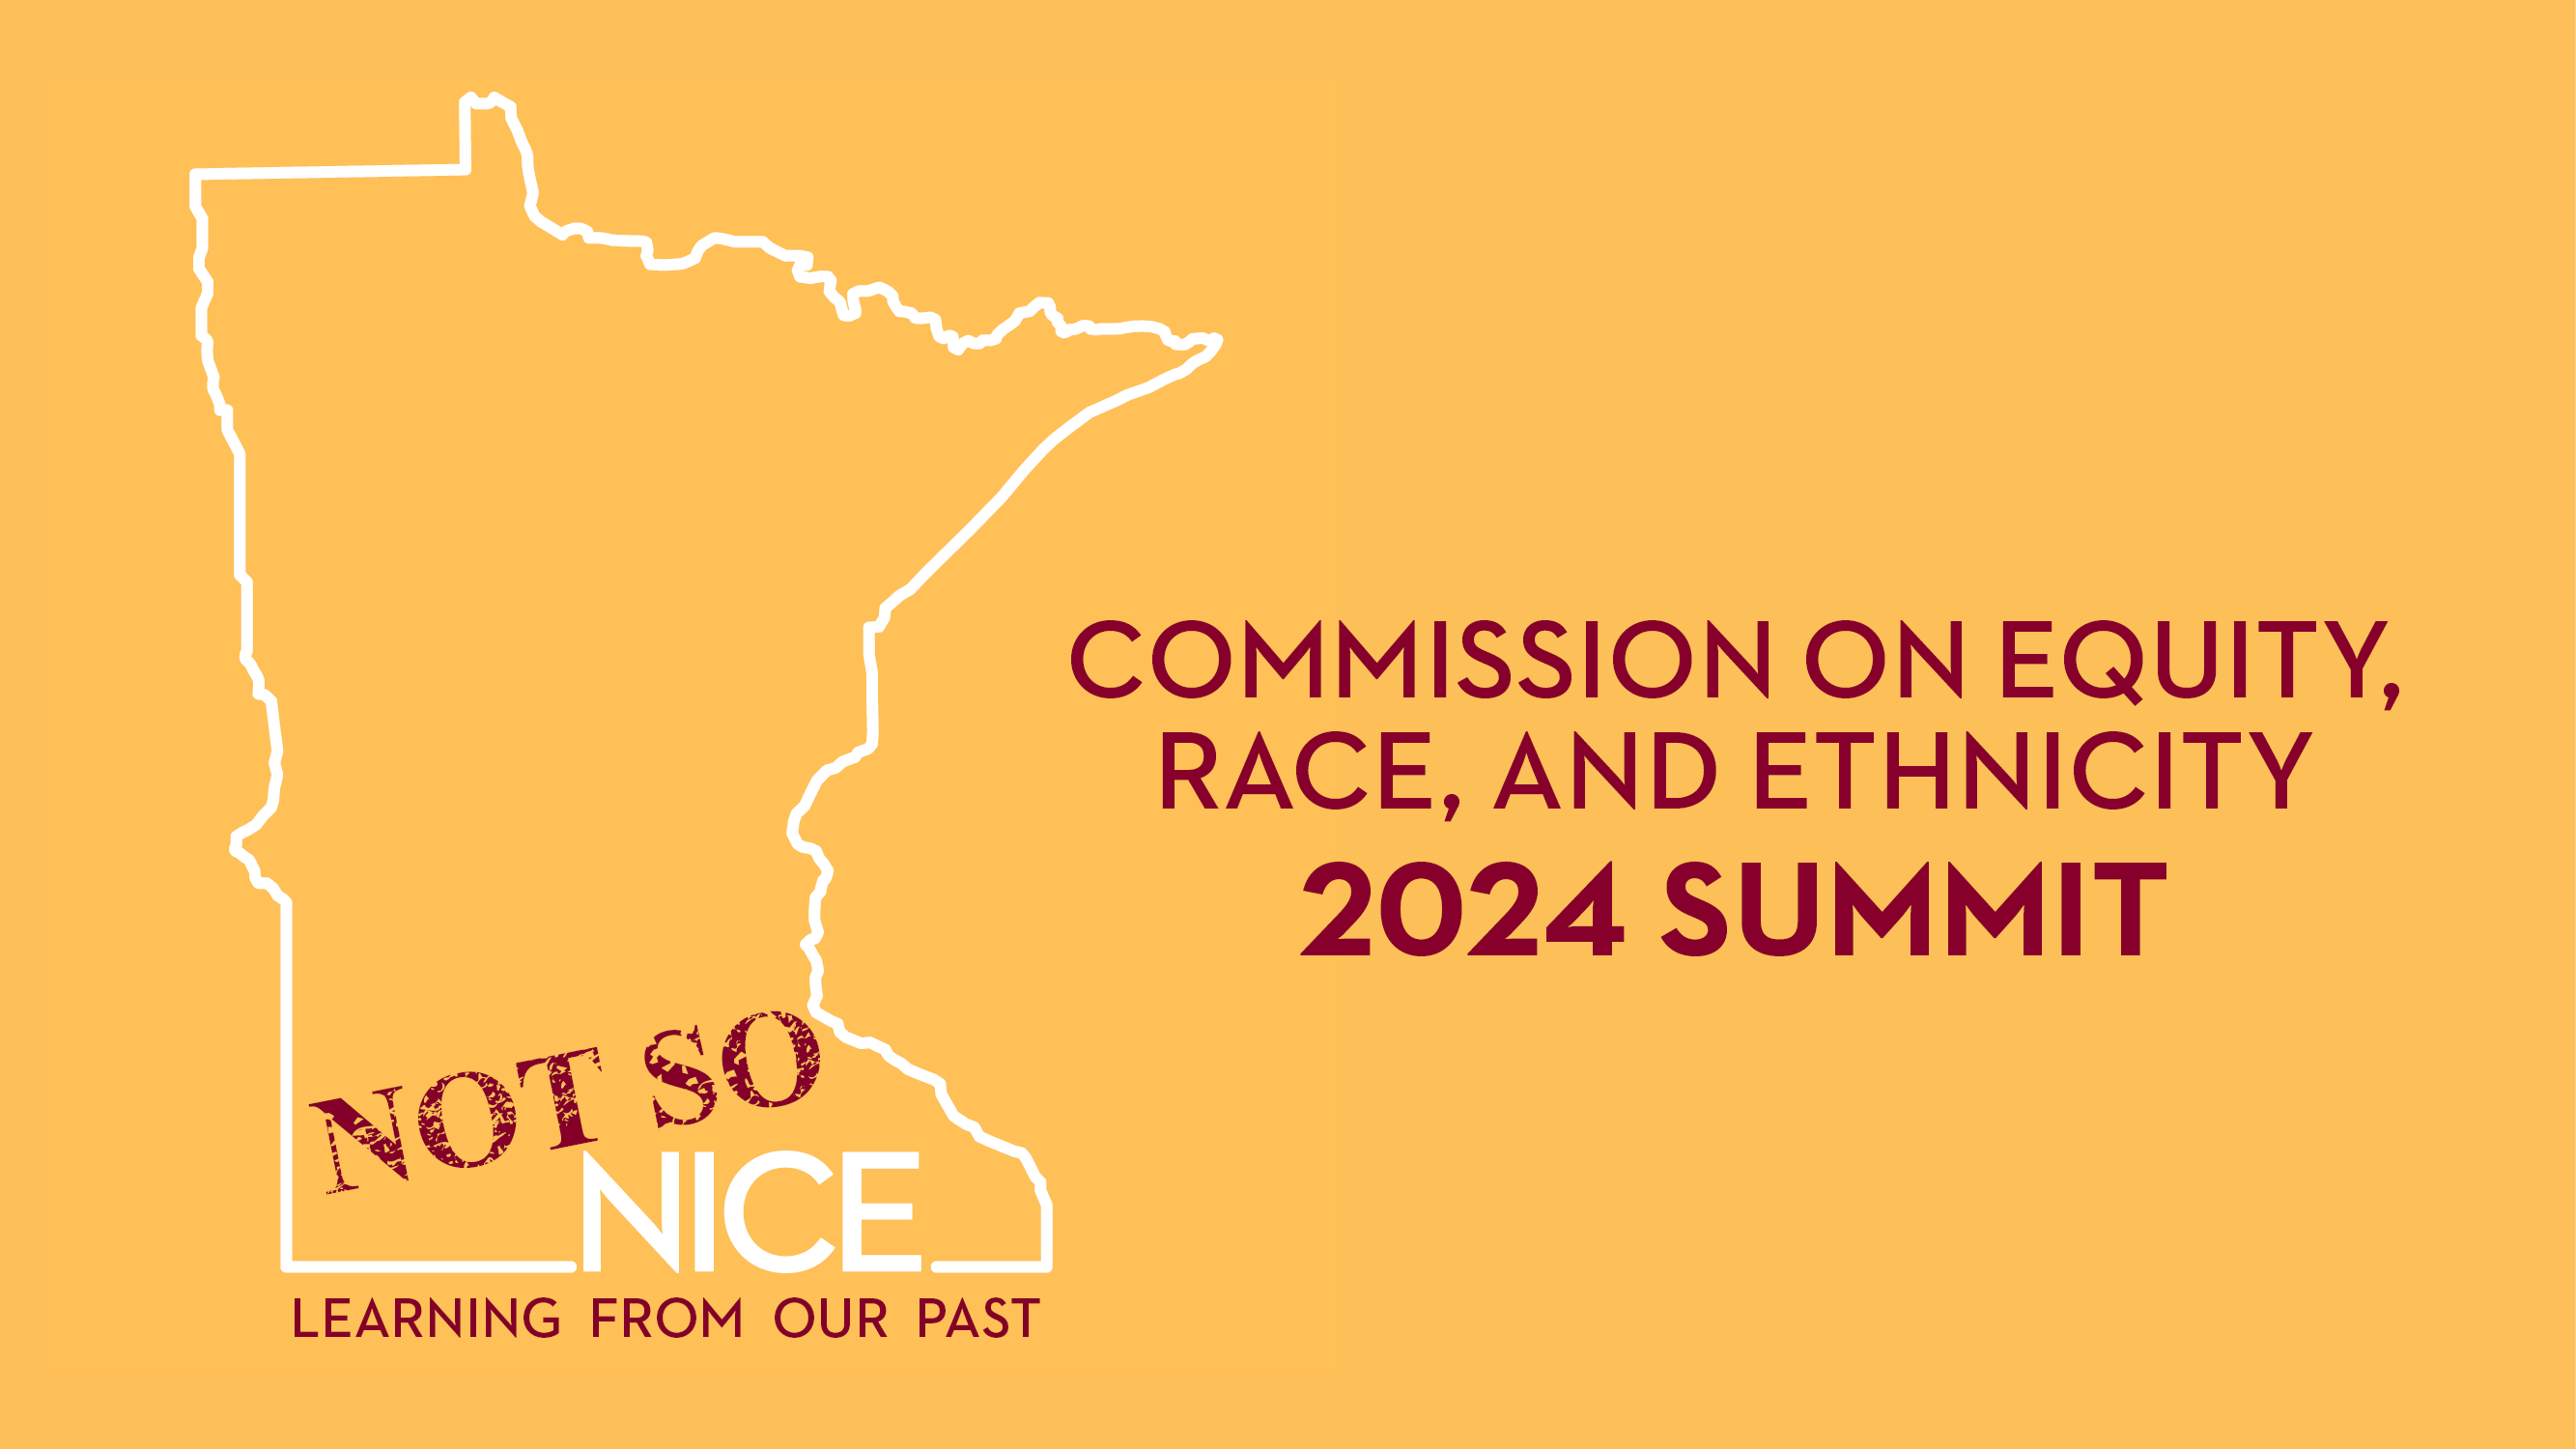 an outline of minnesota state with text "not so nice" and below outline text that says "learning from our past." To the right text says "commission on equity, race, and ethnicity 2024 summit." 